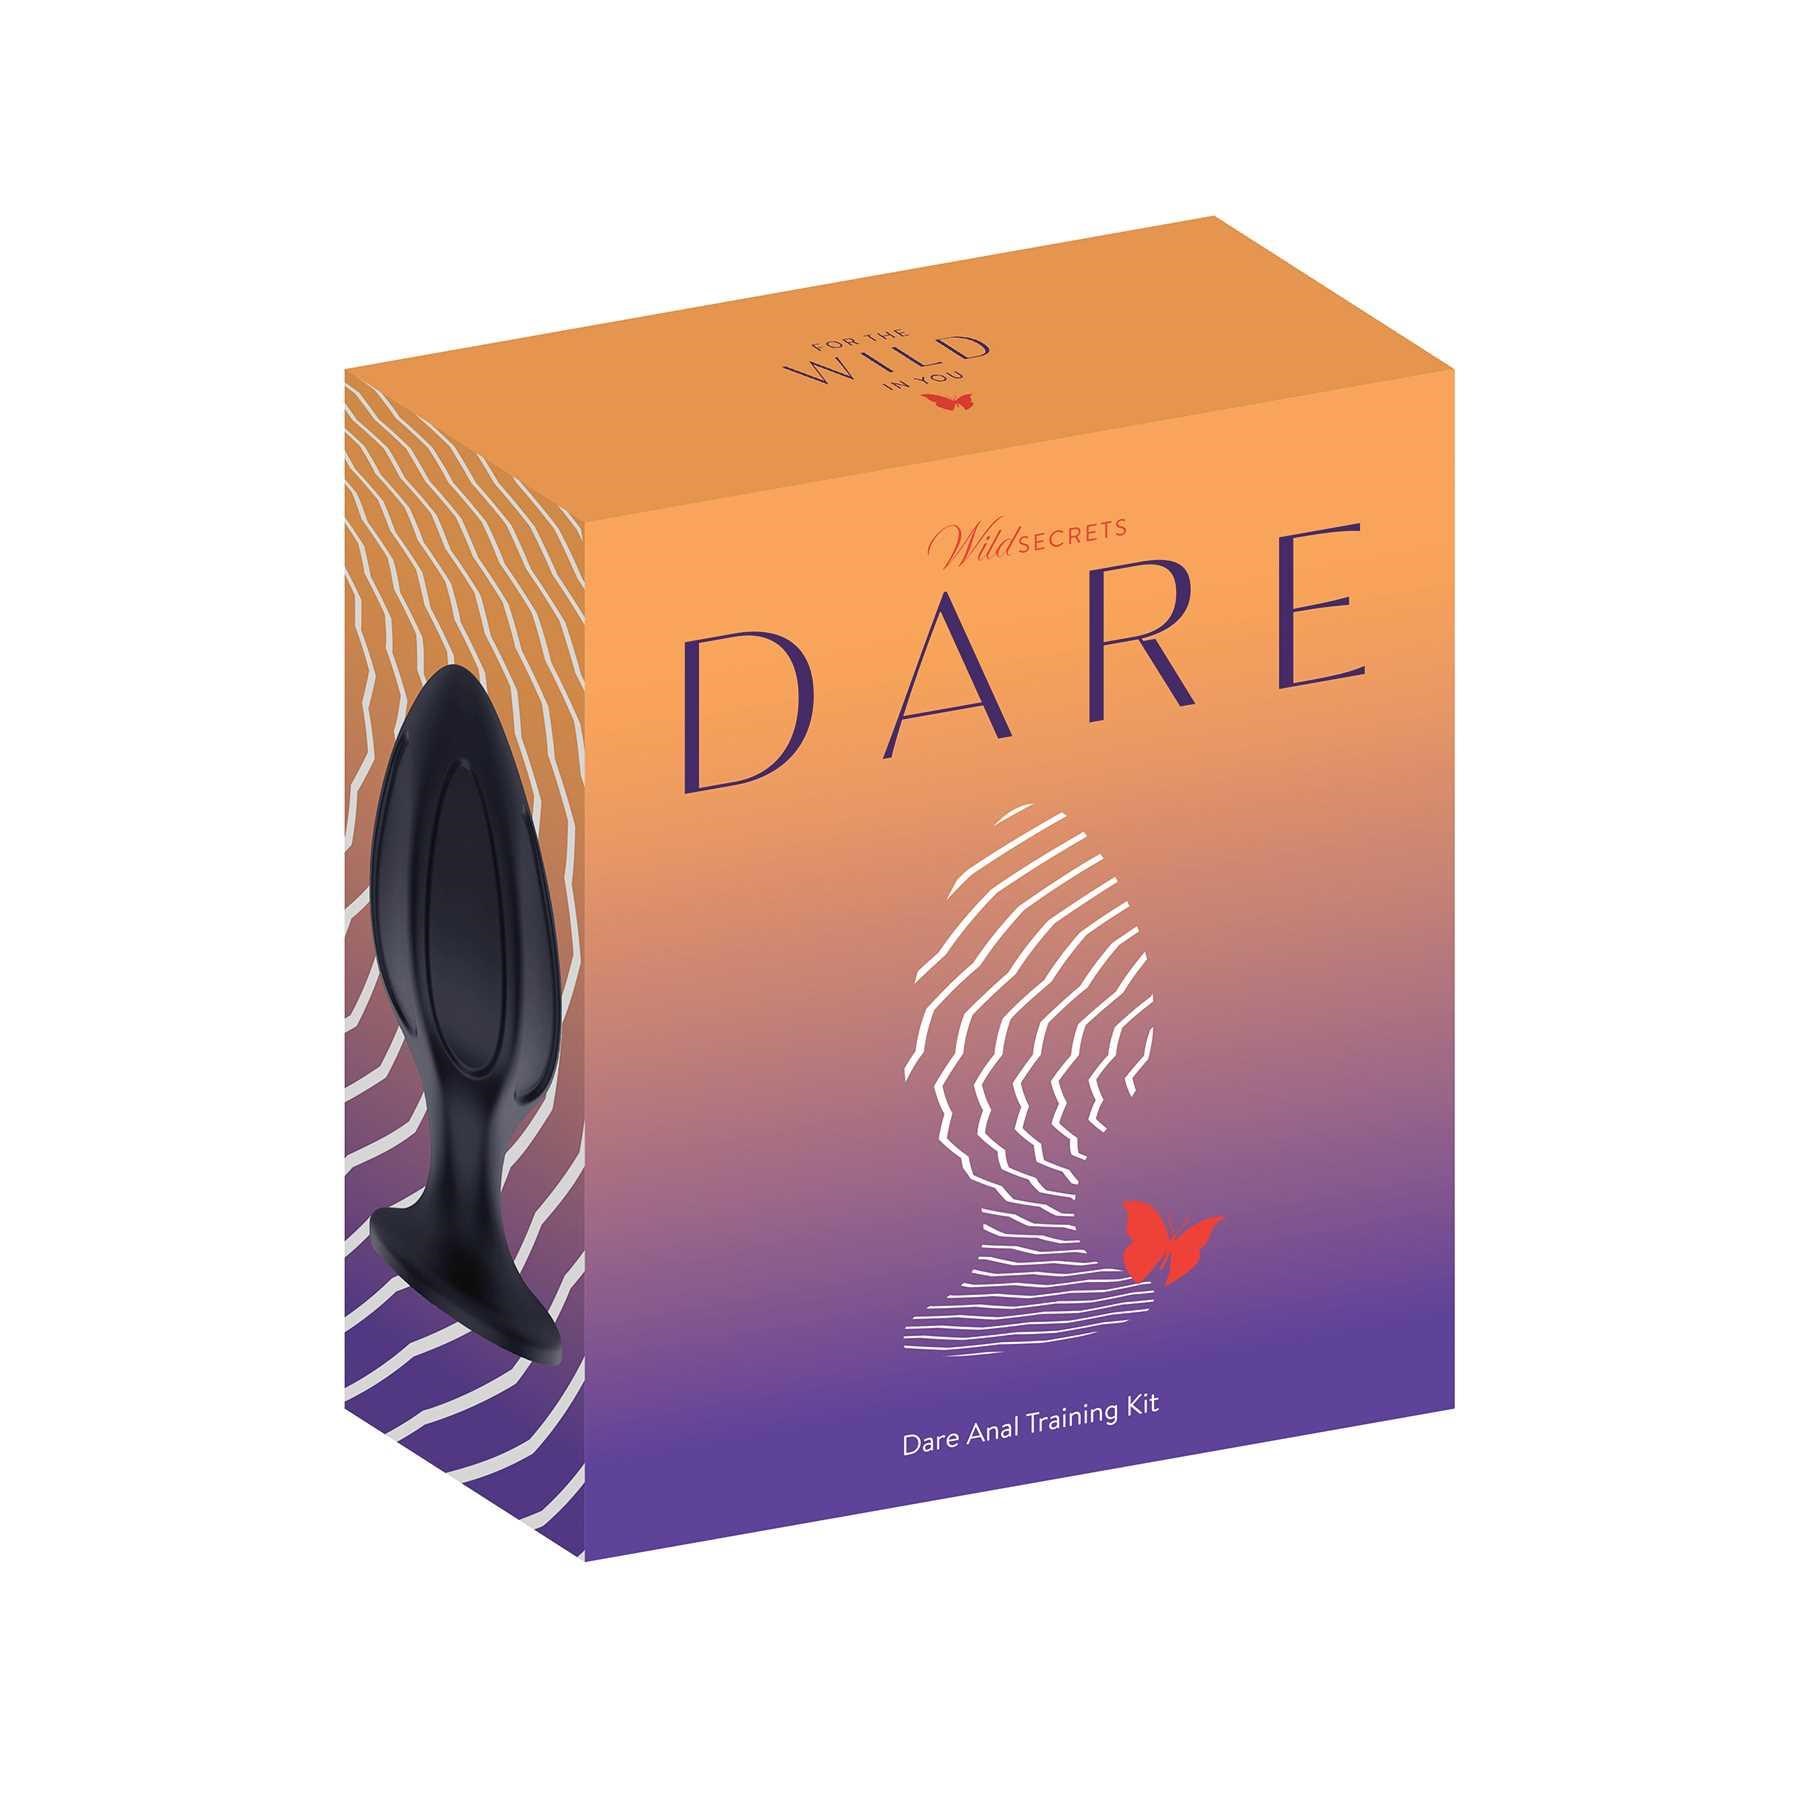 Wild Secrets Dare Silcone Anal Trainer Kit front box packaging